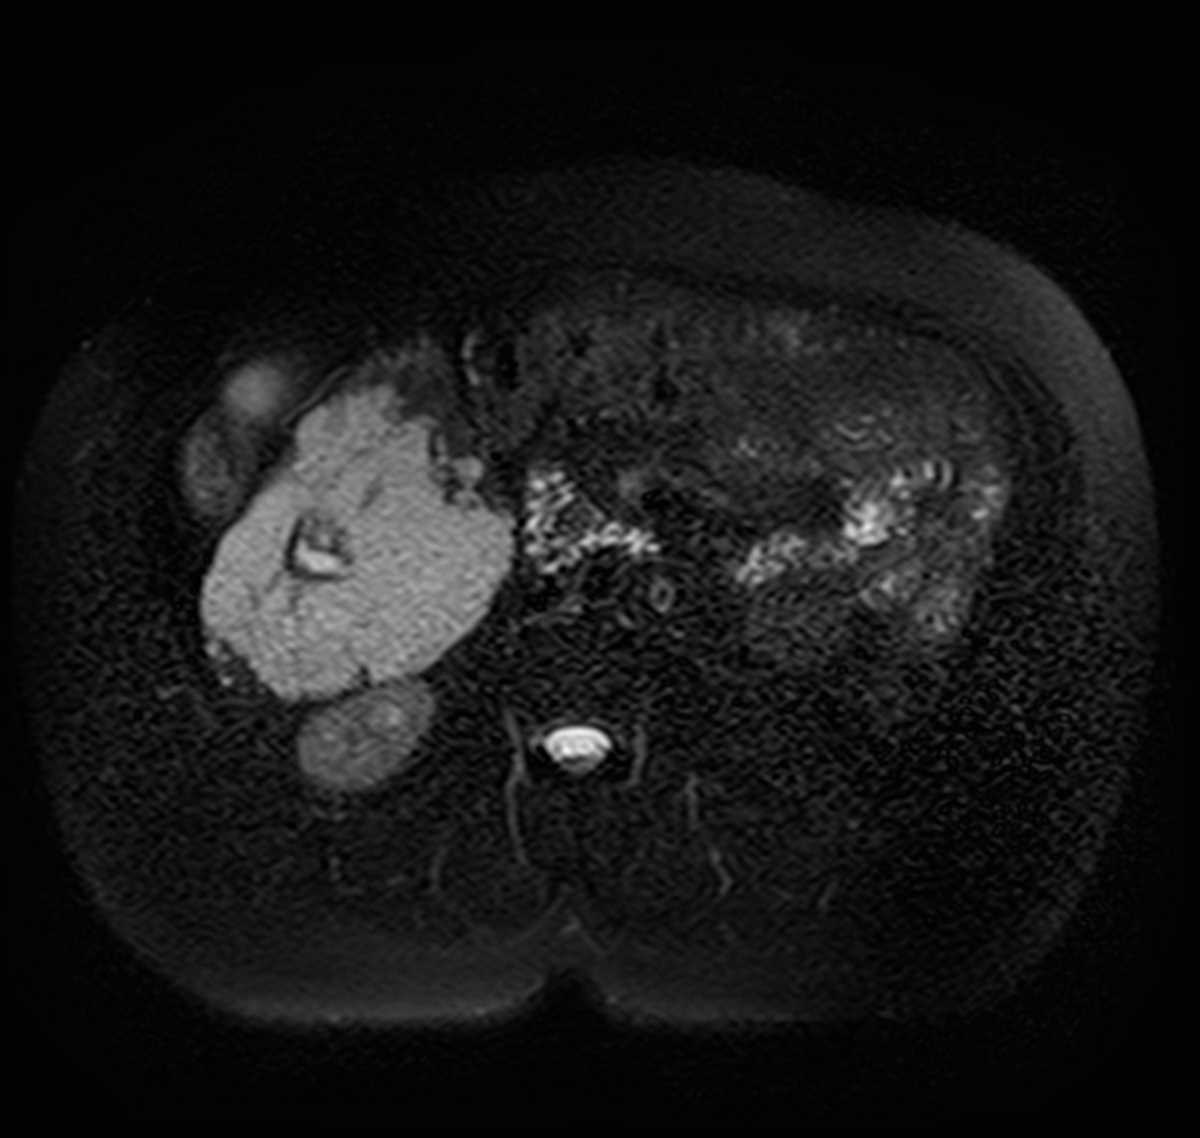 Giant liver hemangioma with central scar - CTisus CT Scan